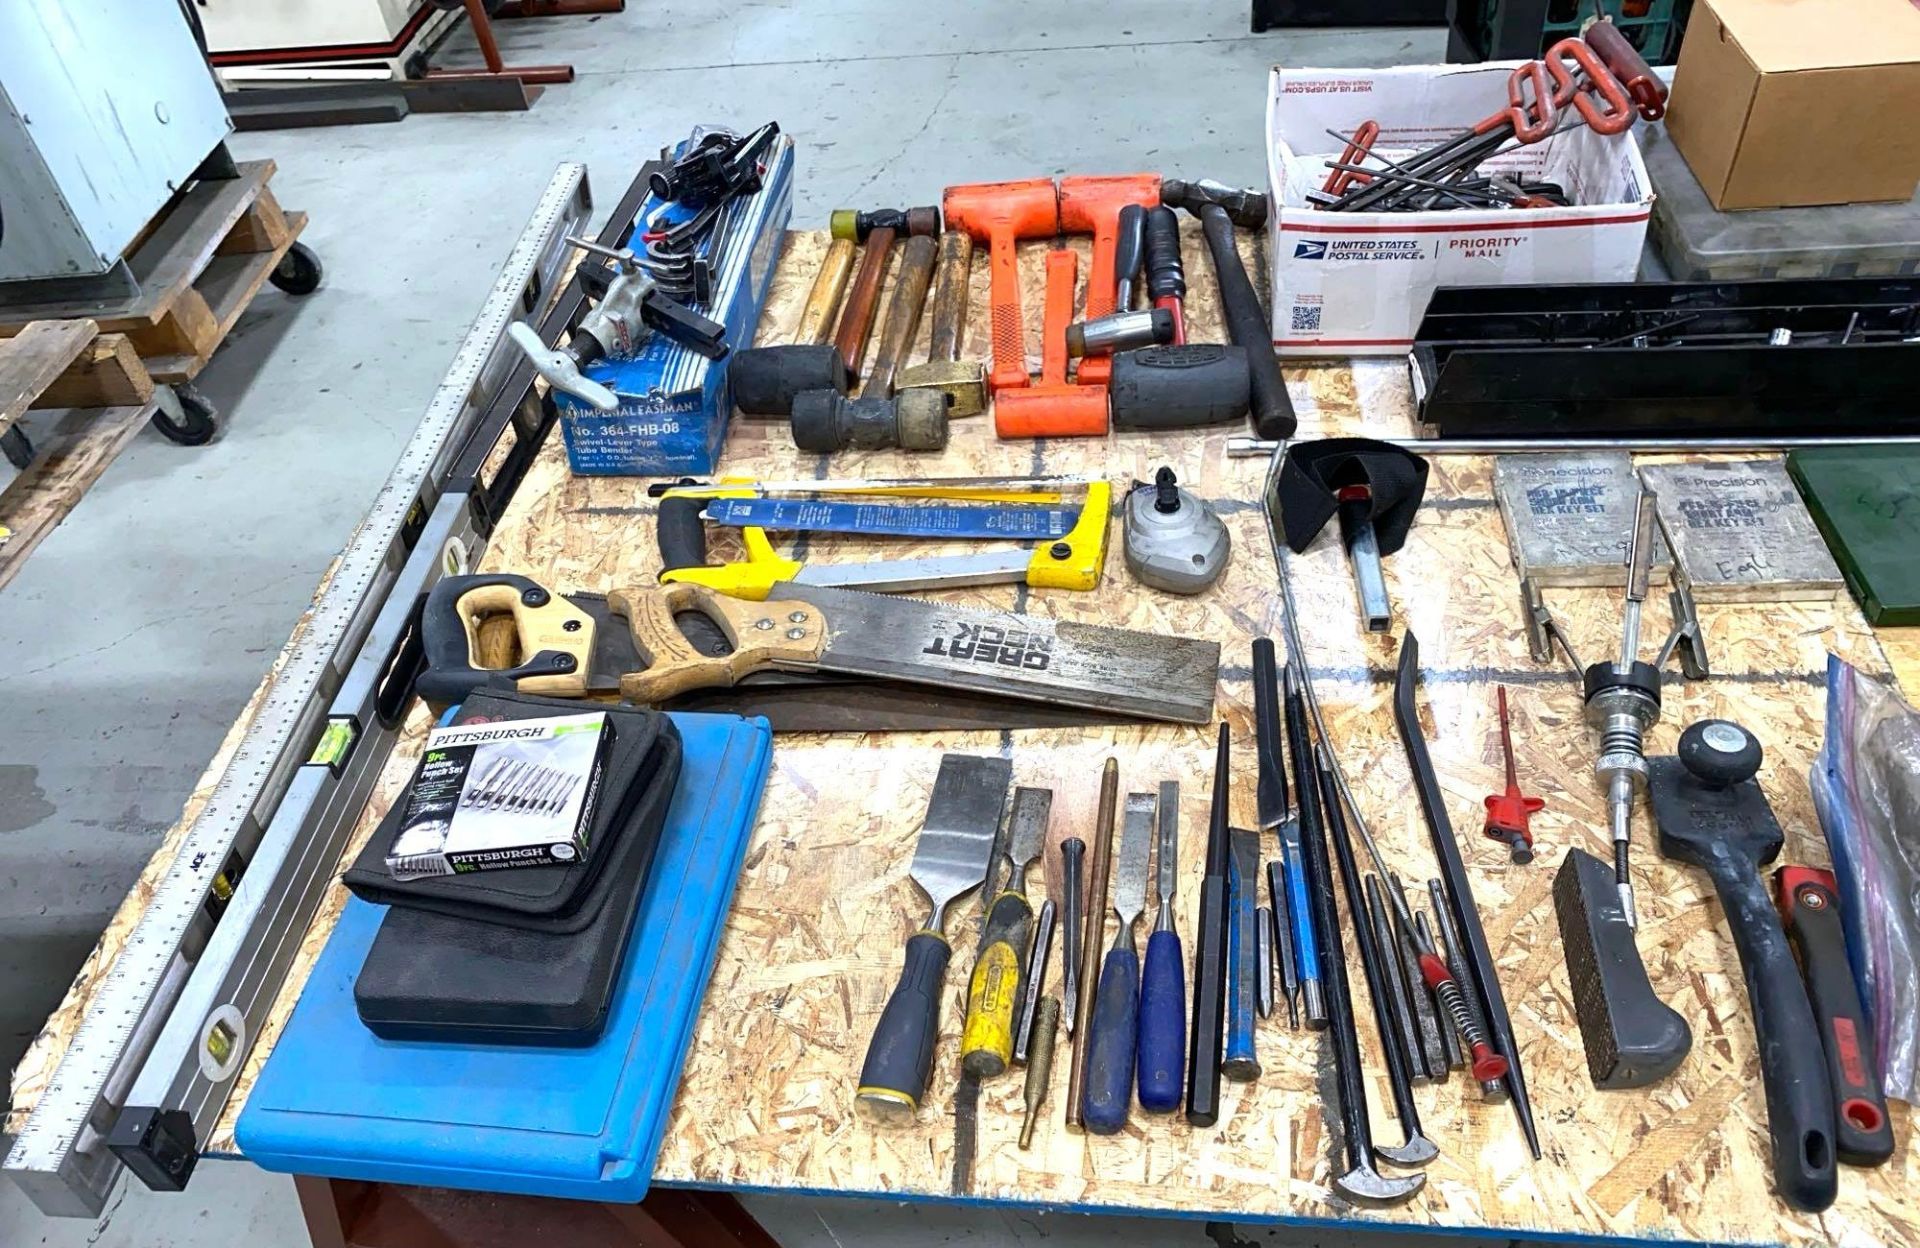 BIG LOT of Hand Tools, Wrenches, Files, Sockets, Levels, Etc. - Image 7 of 7